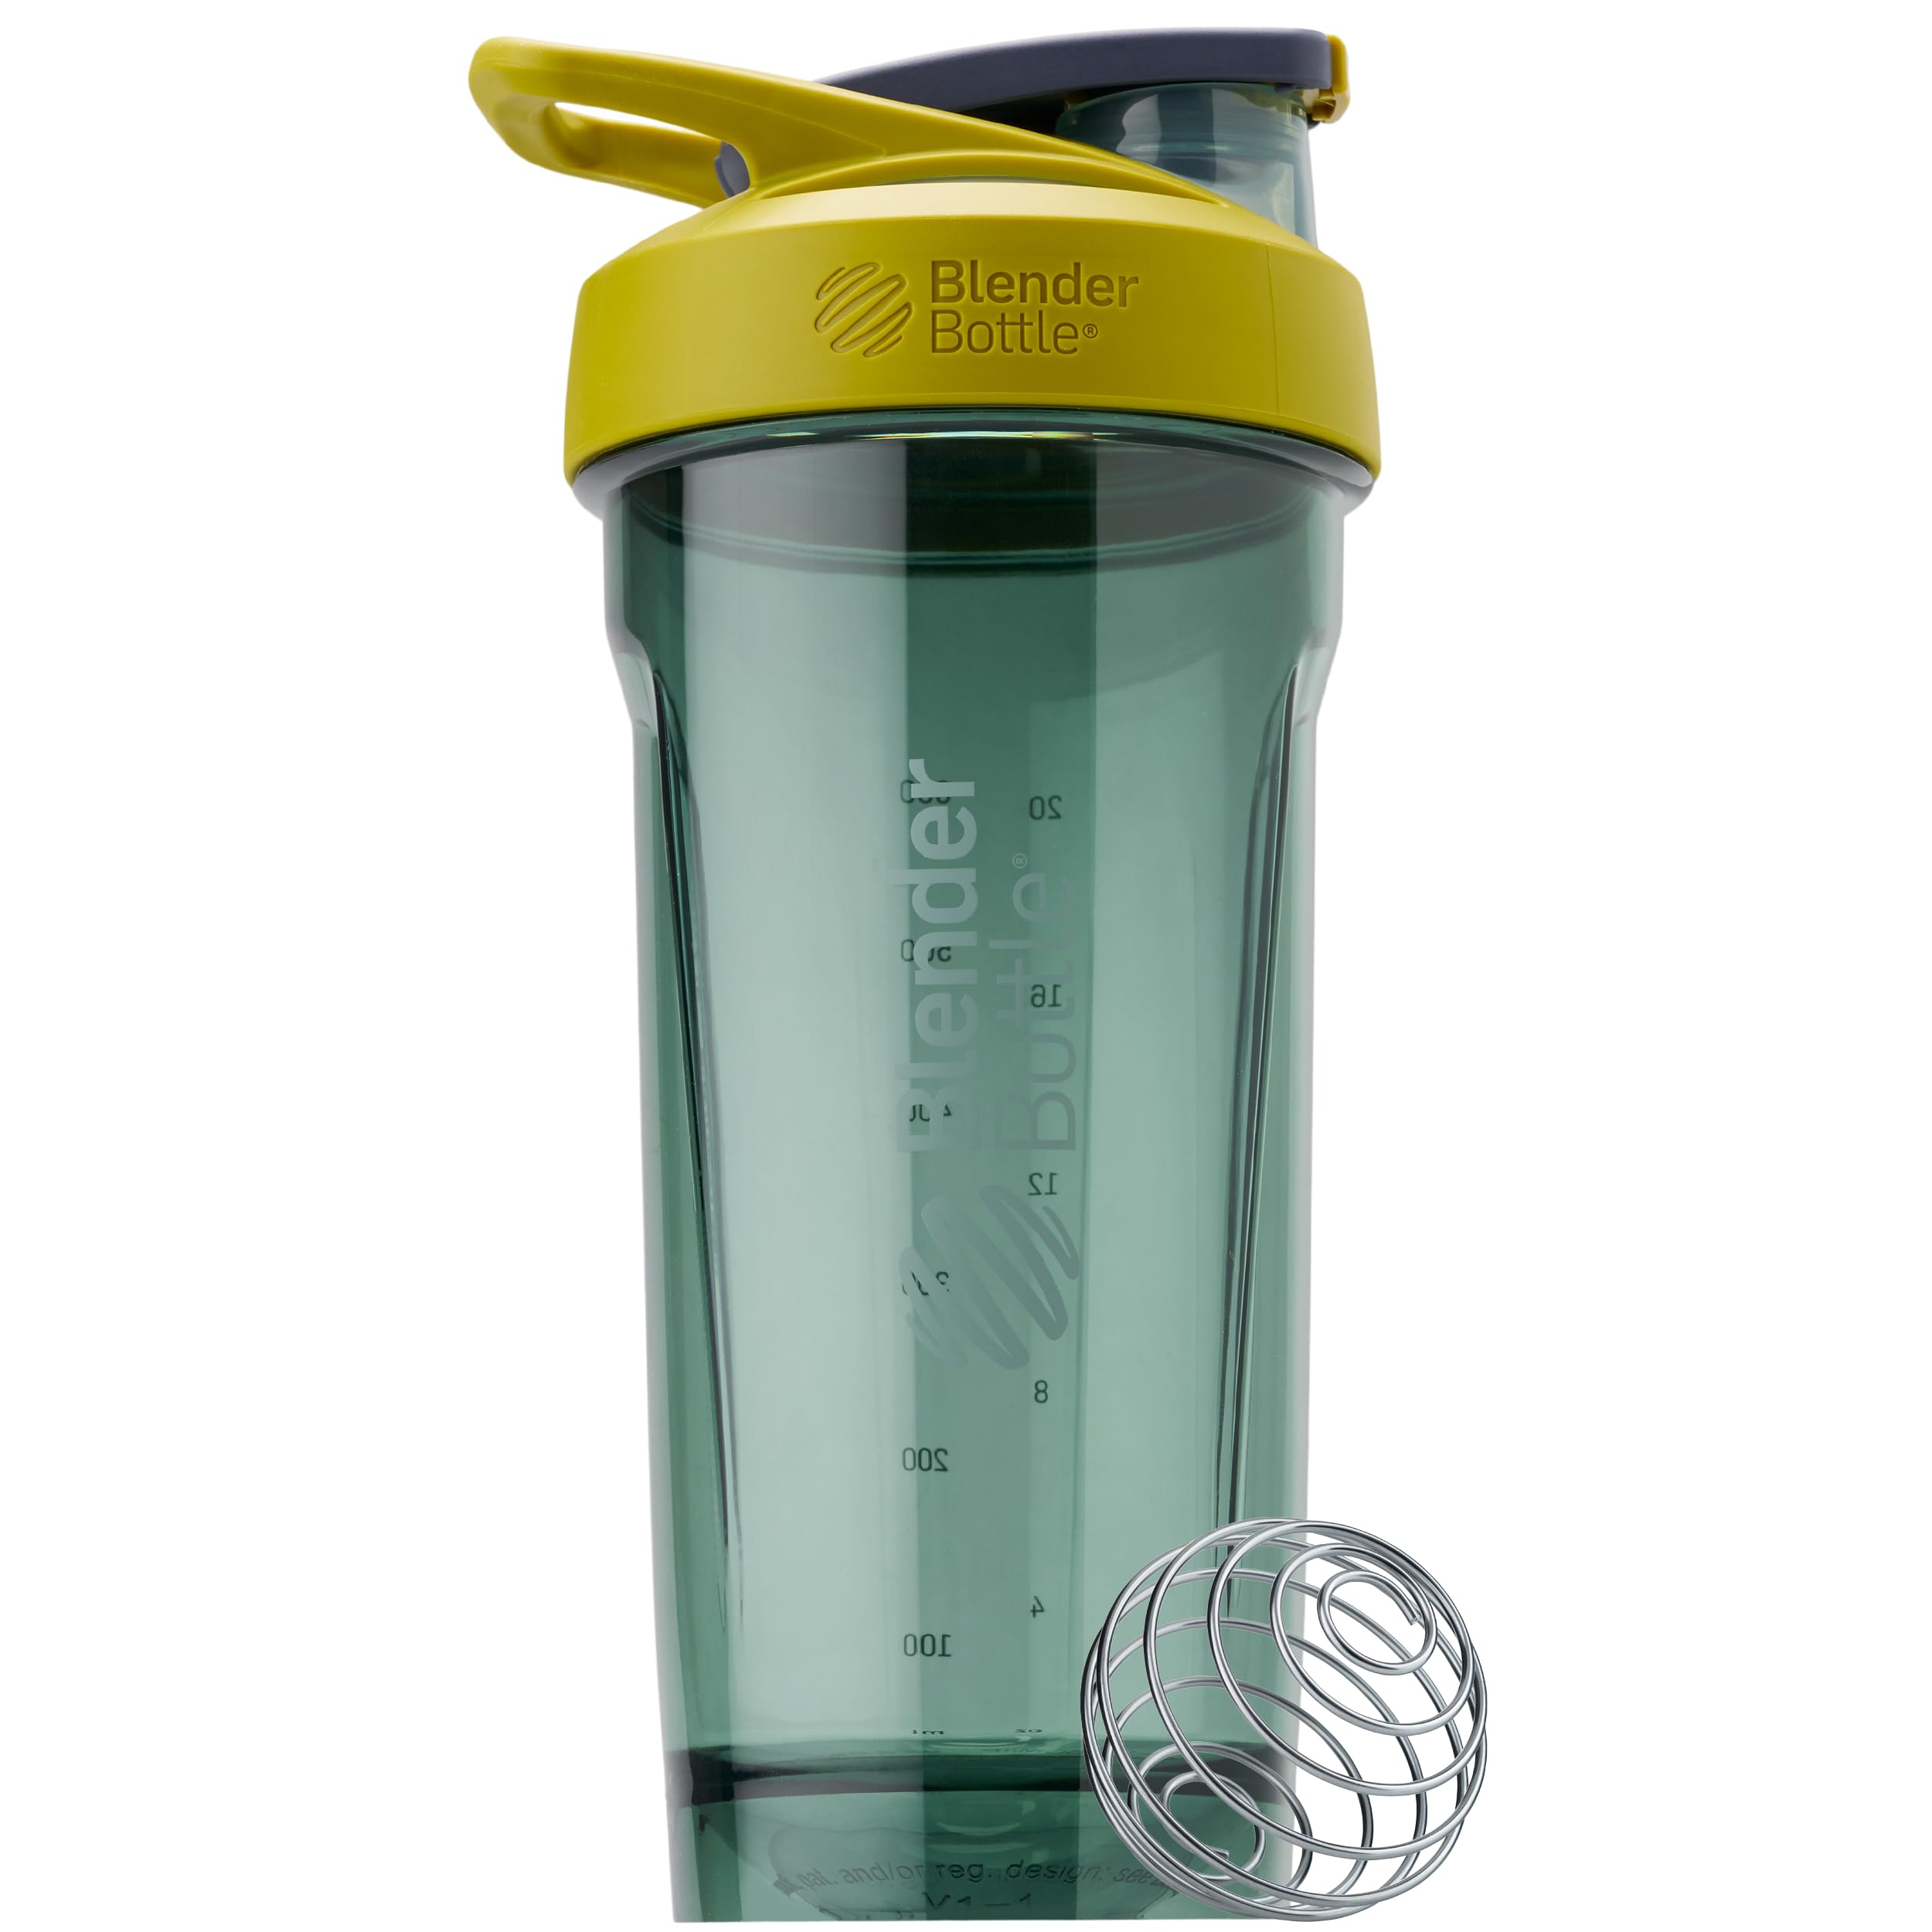 BlenderBottle Strada Shaker Cup Perfect for Protein Shakes and Pre Workout, 28-Ounce, Yellow